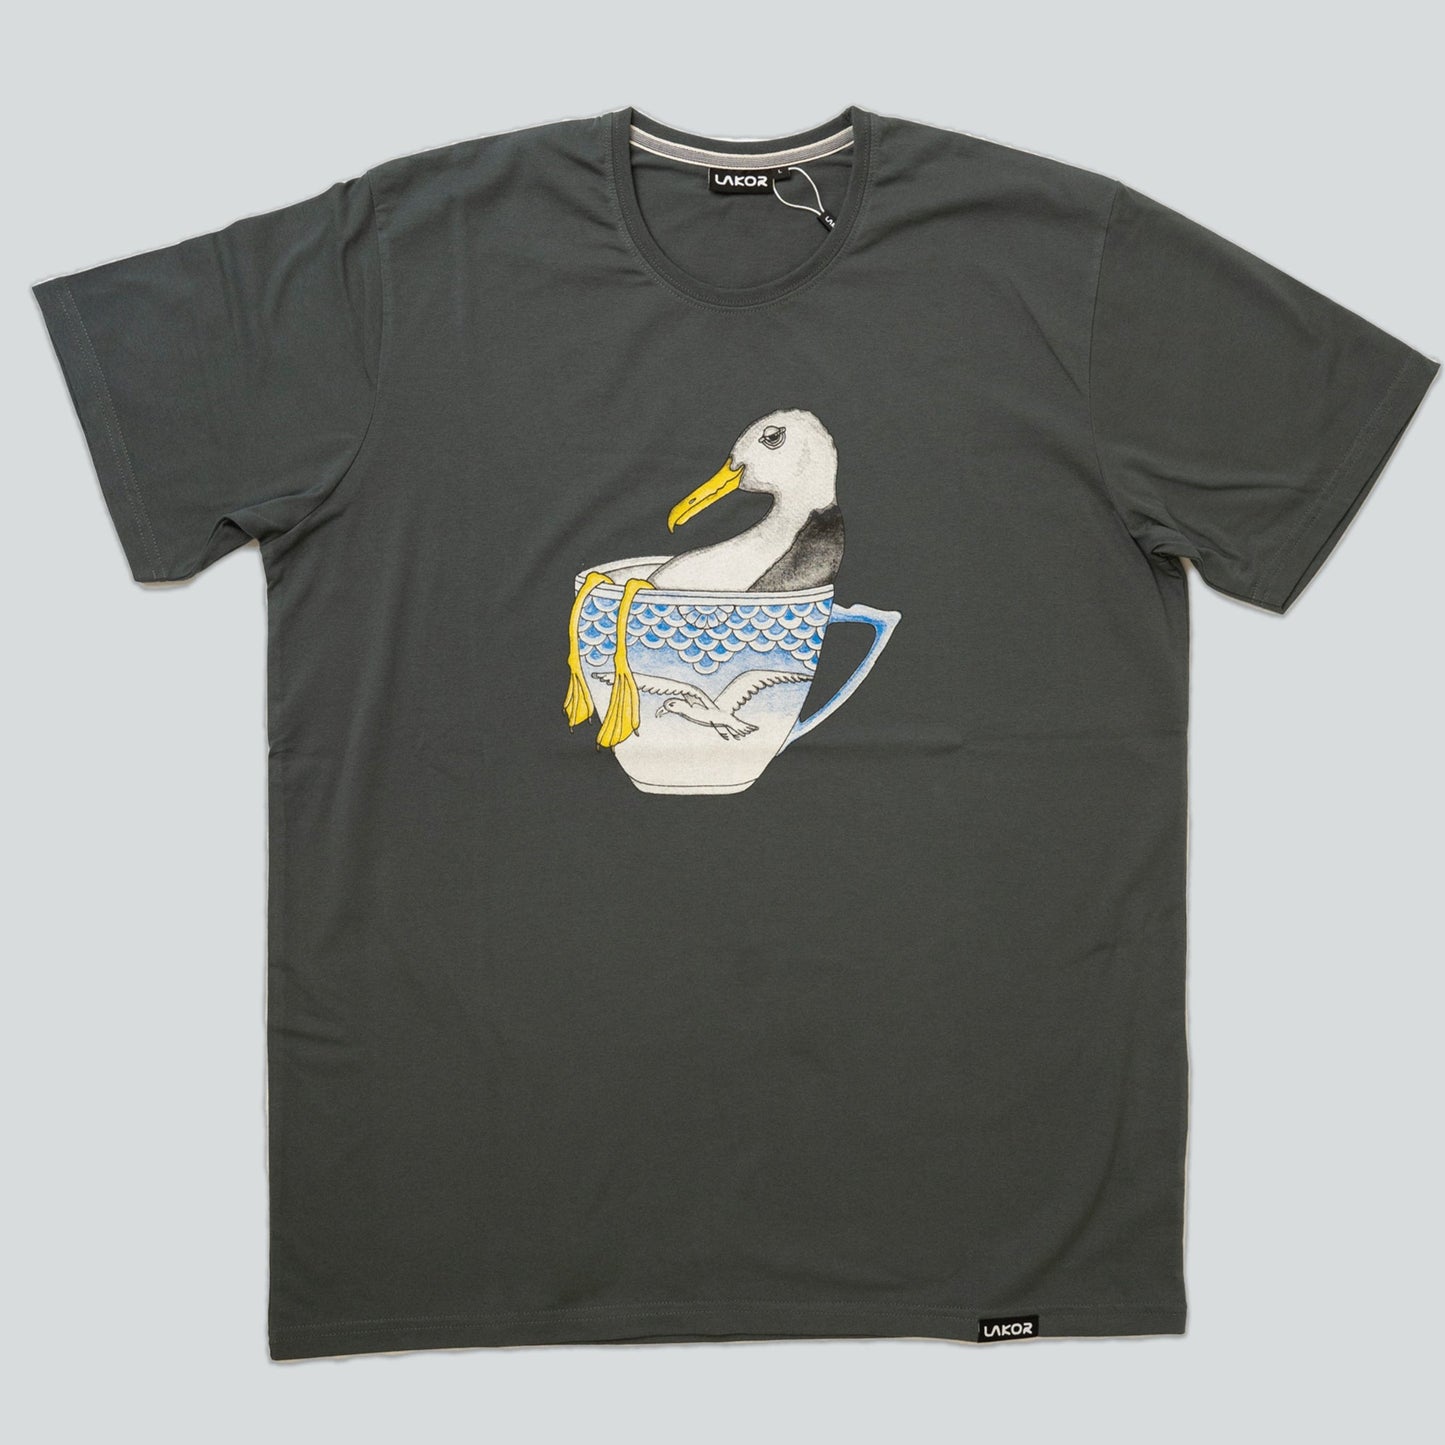 Lakor - Seagull In A Cup T-shirt